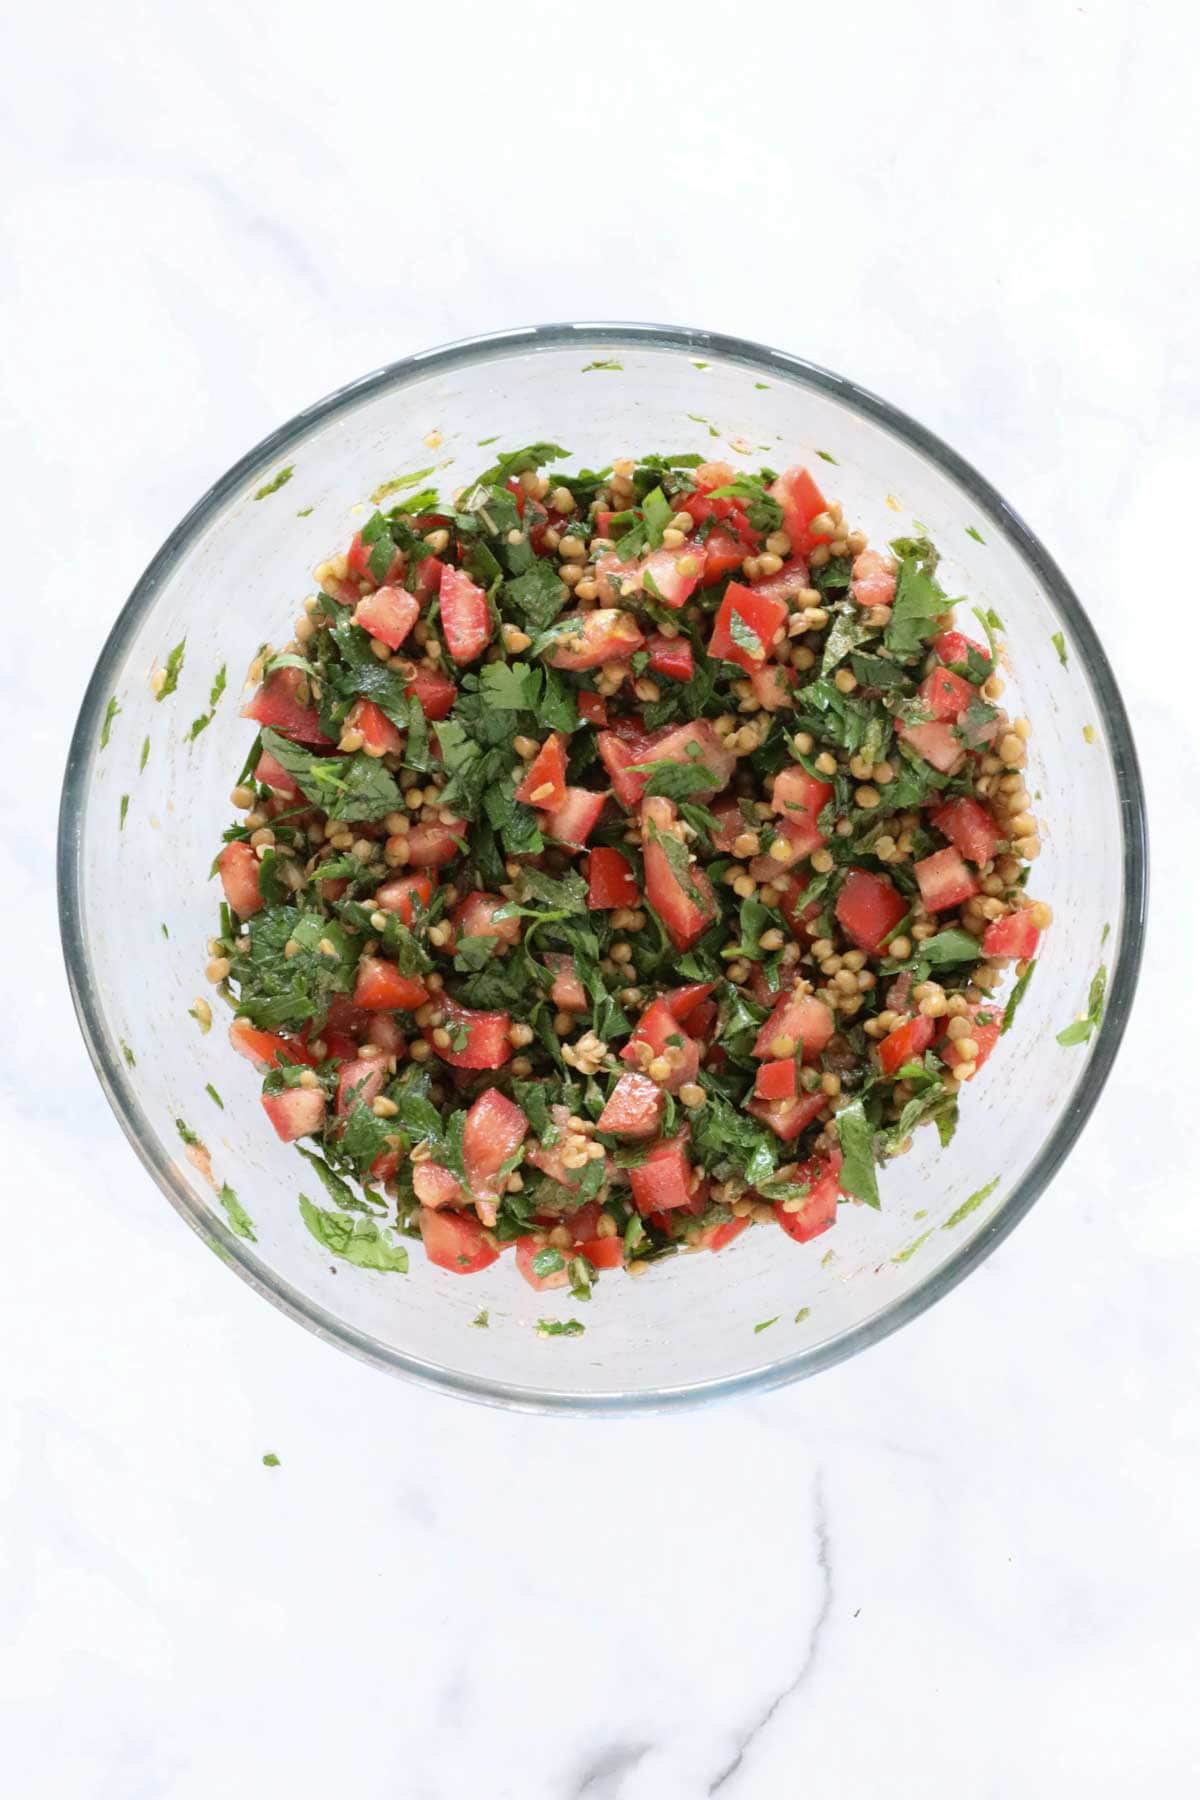 The lentil salad mixed with the dressing in the mixing bowl.